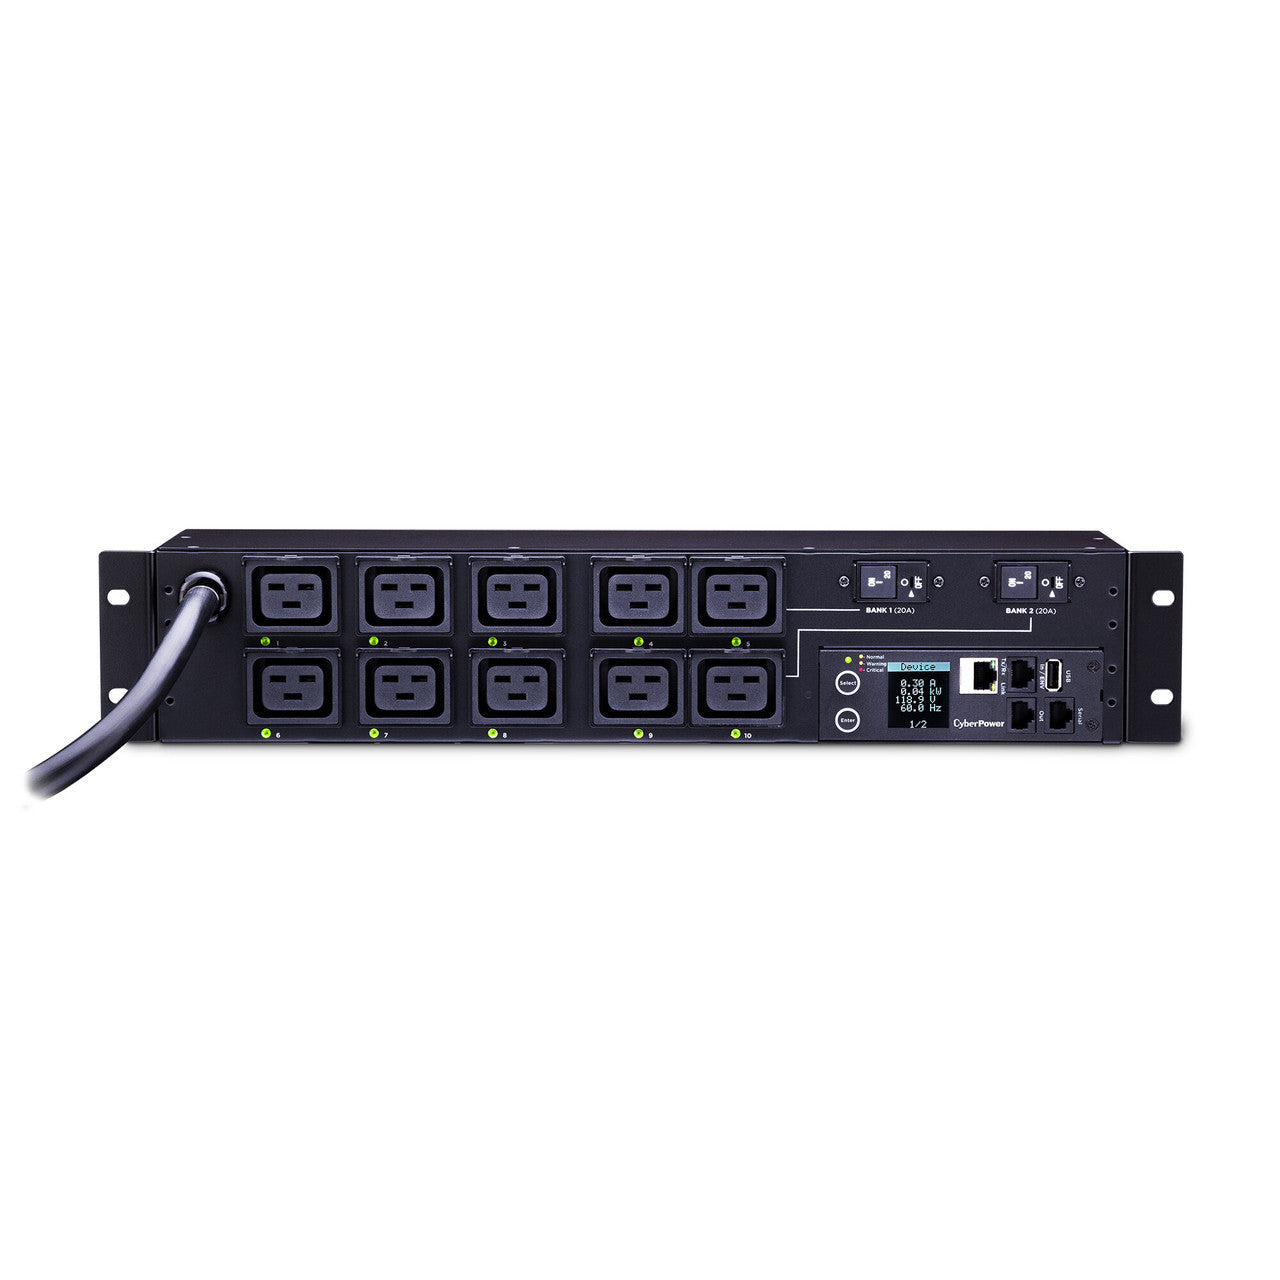 CyberPower PDU81009 SW MBO PDU 30A 208V Metered-by-Outlet Switched PDU 10 C19 Outlets 12ft cord 3yr Warranty